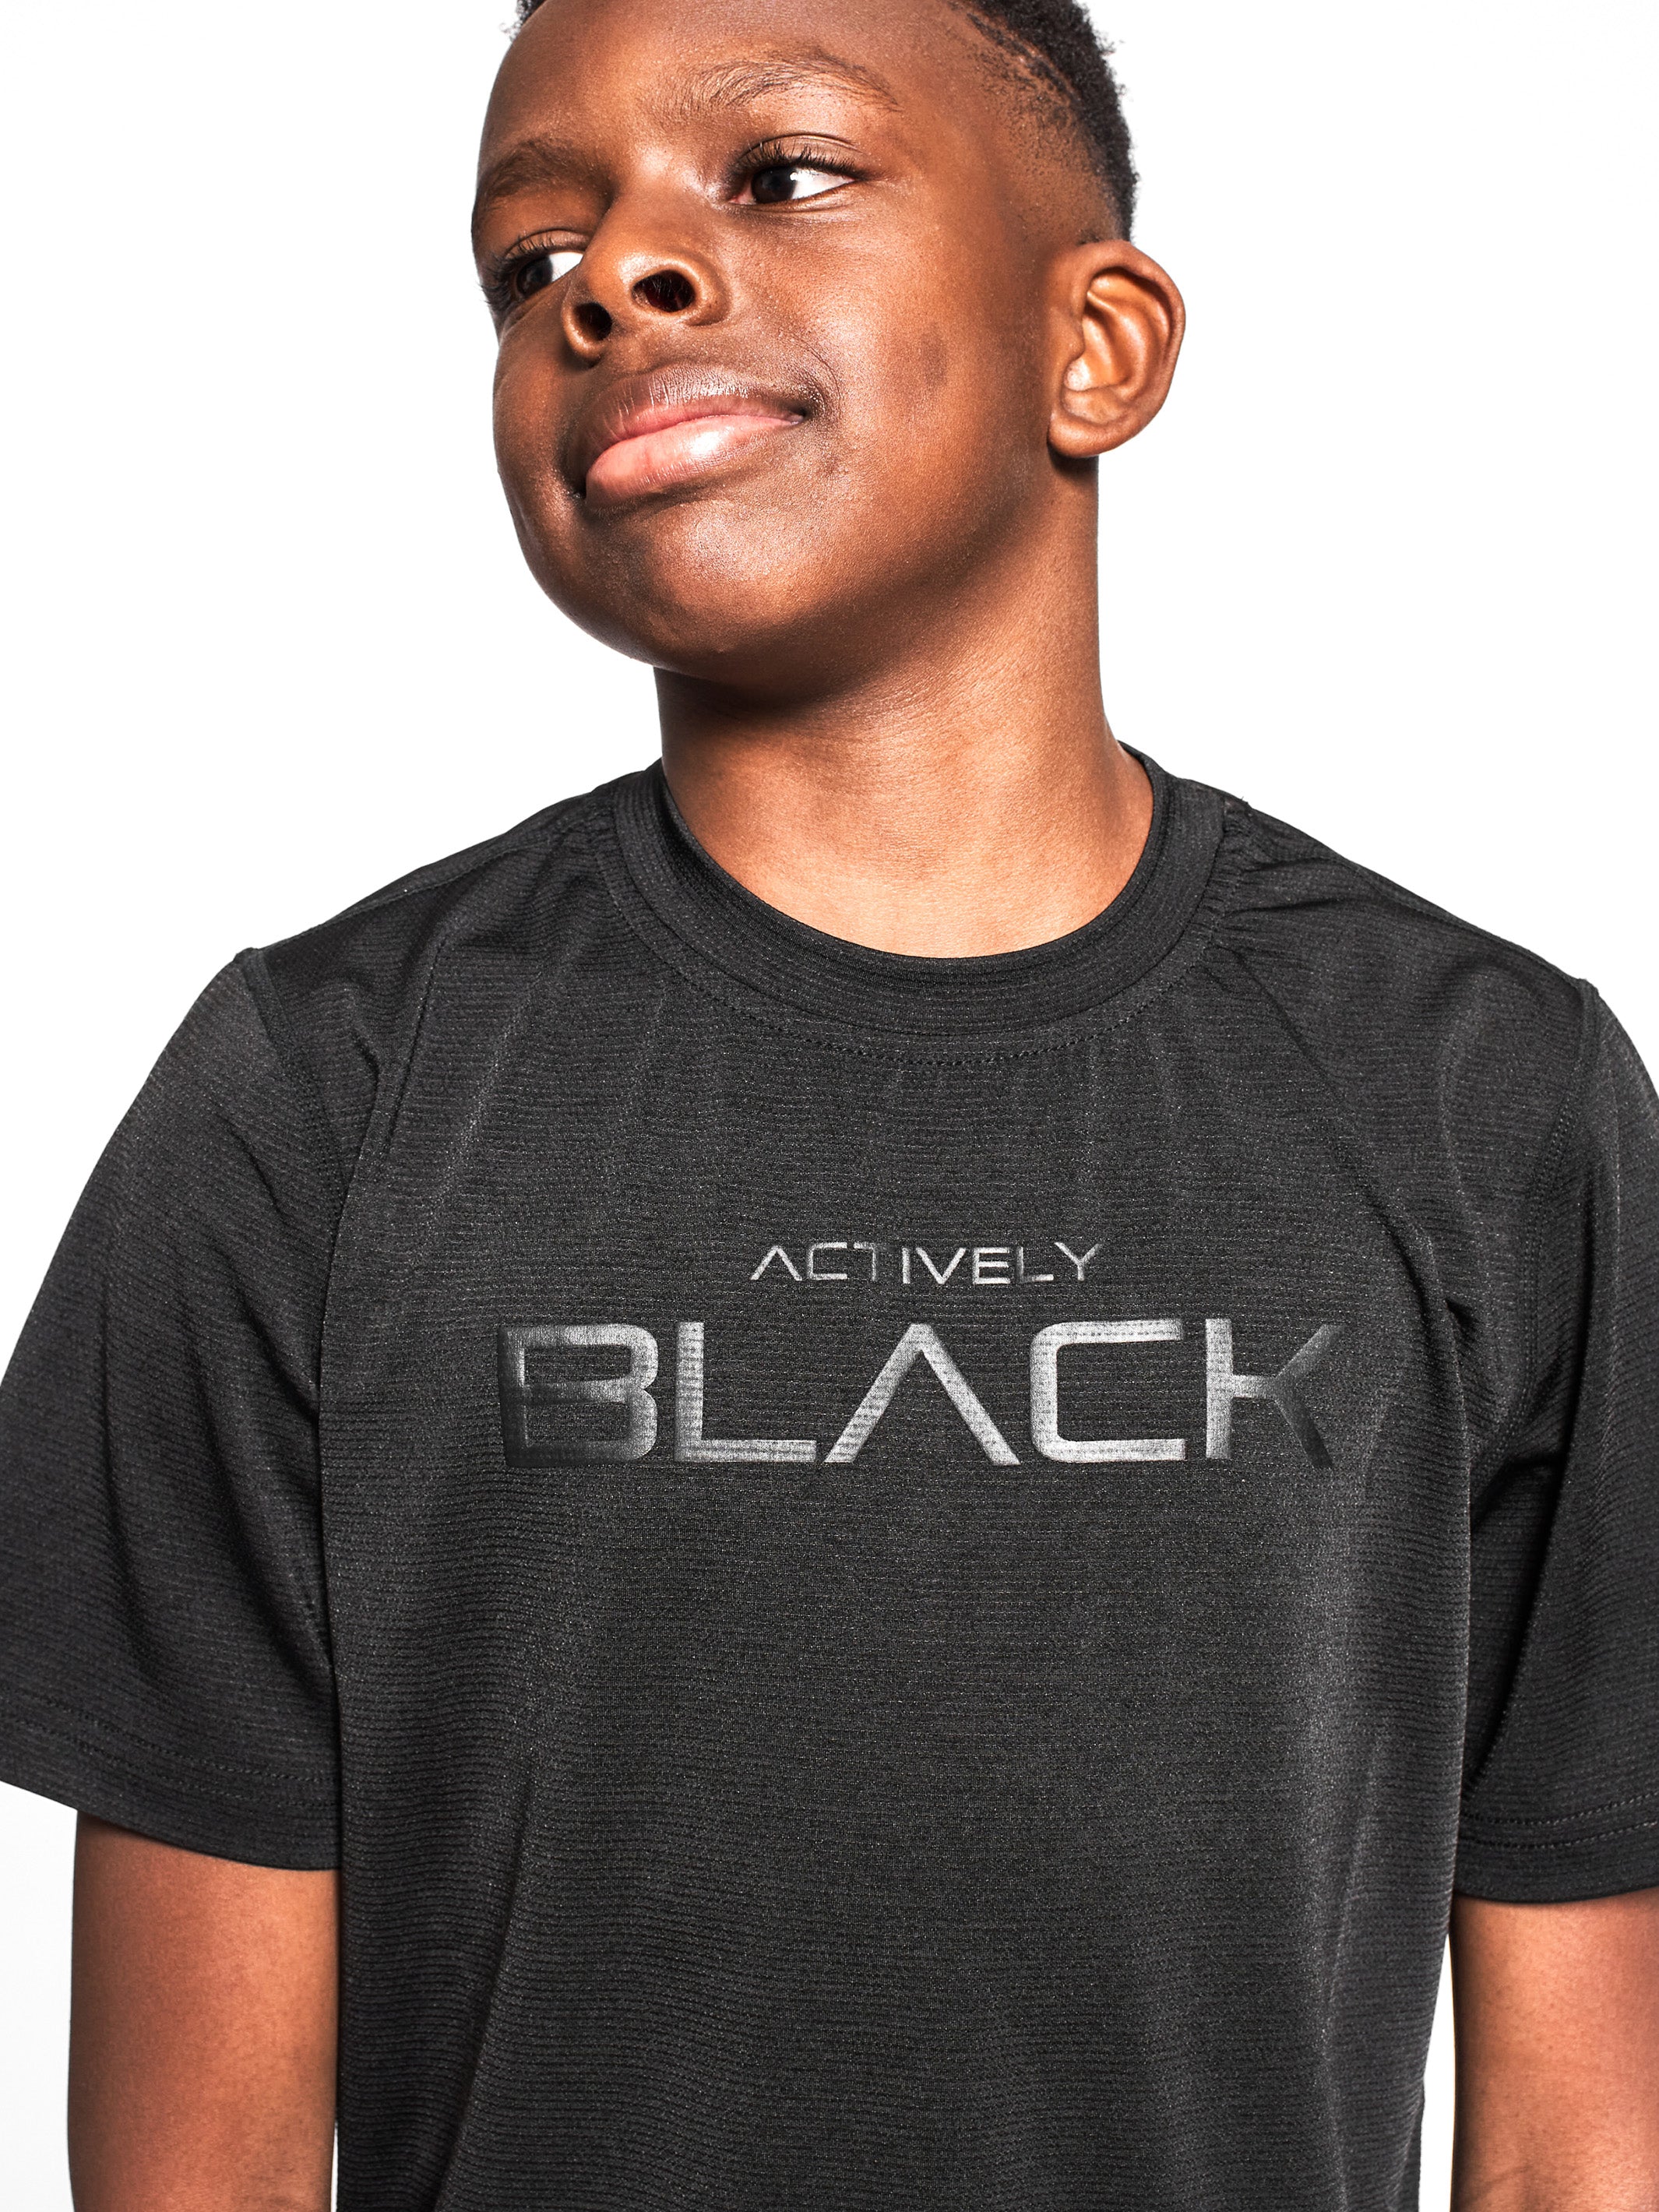 Youth Actively Black Stealth Performance Shirt